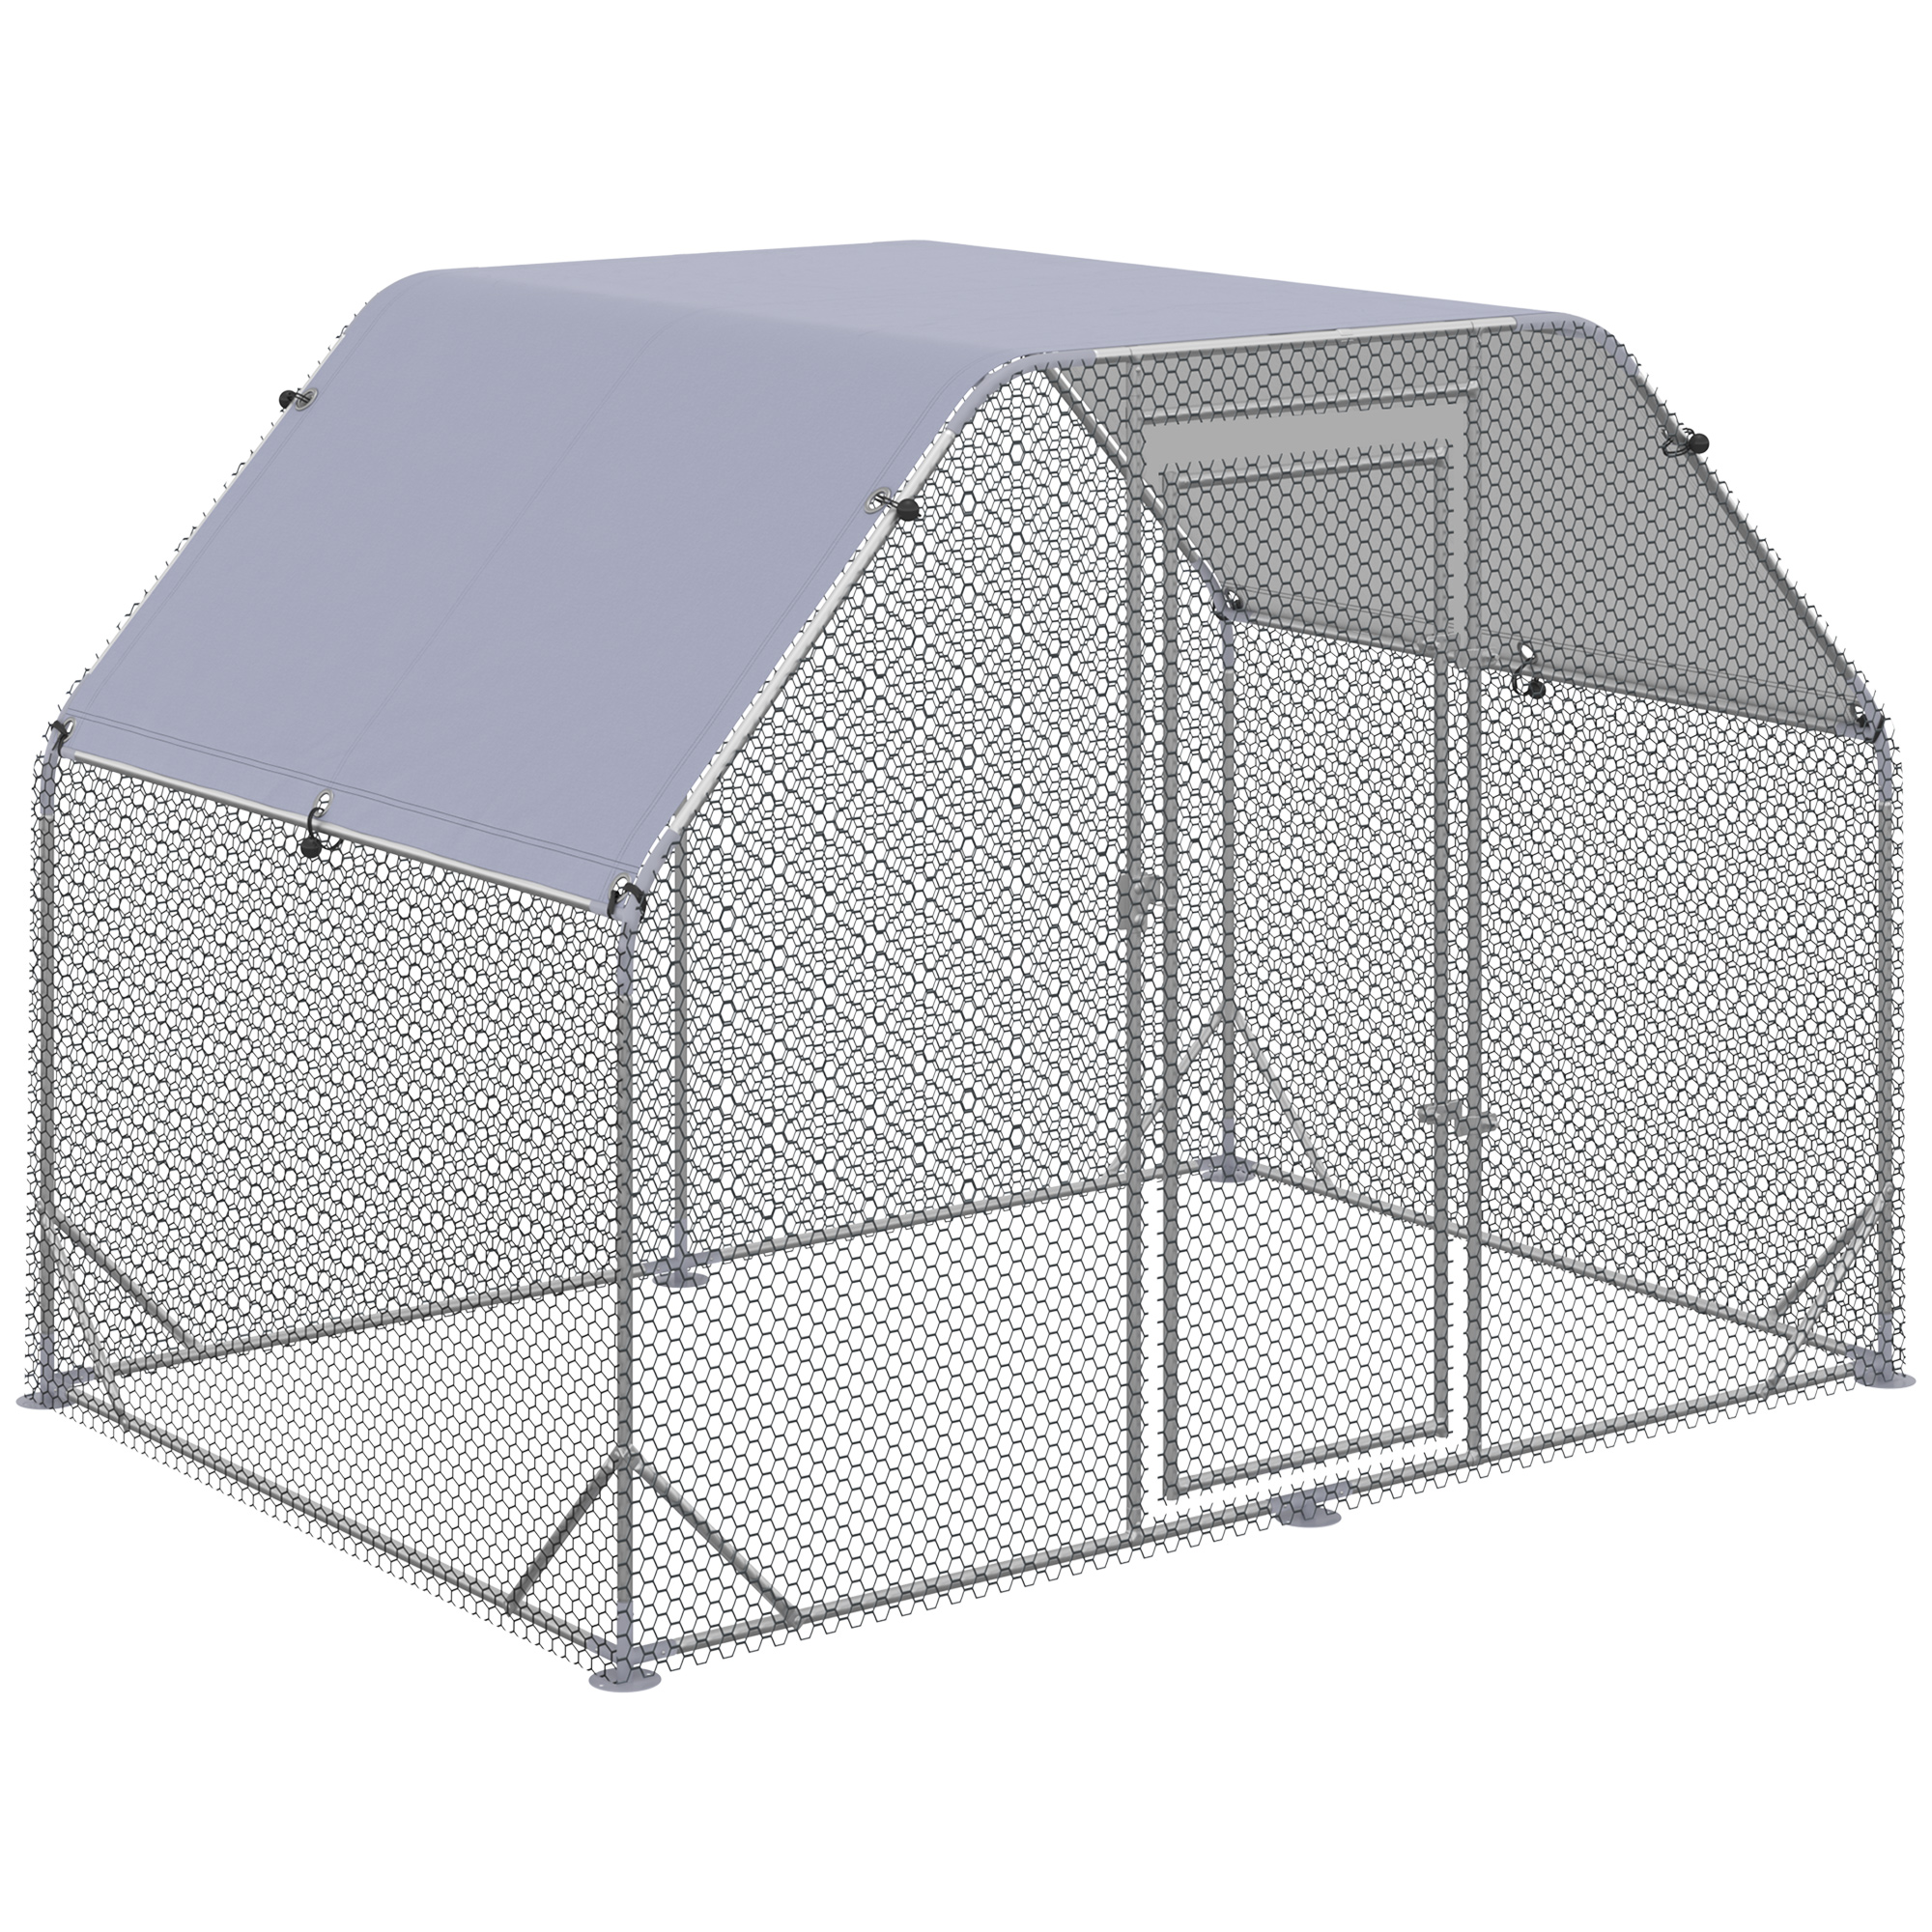 PawHut Chicken Run with Cover for 4-6 Chickens Steel